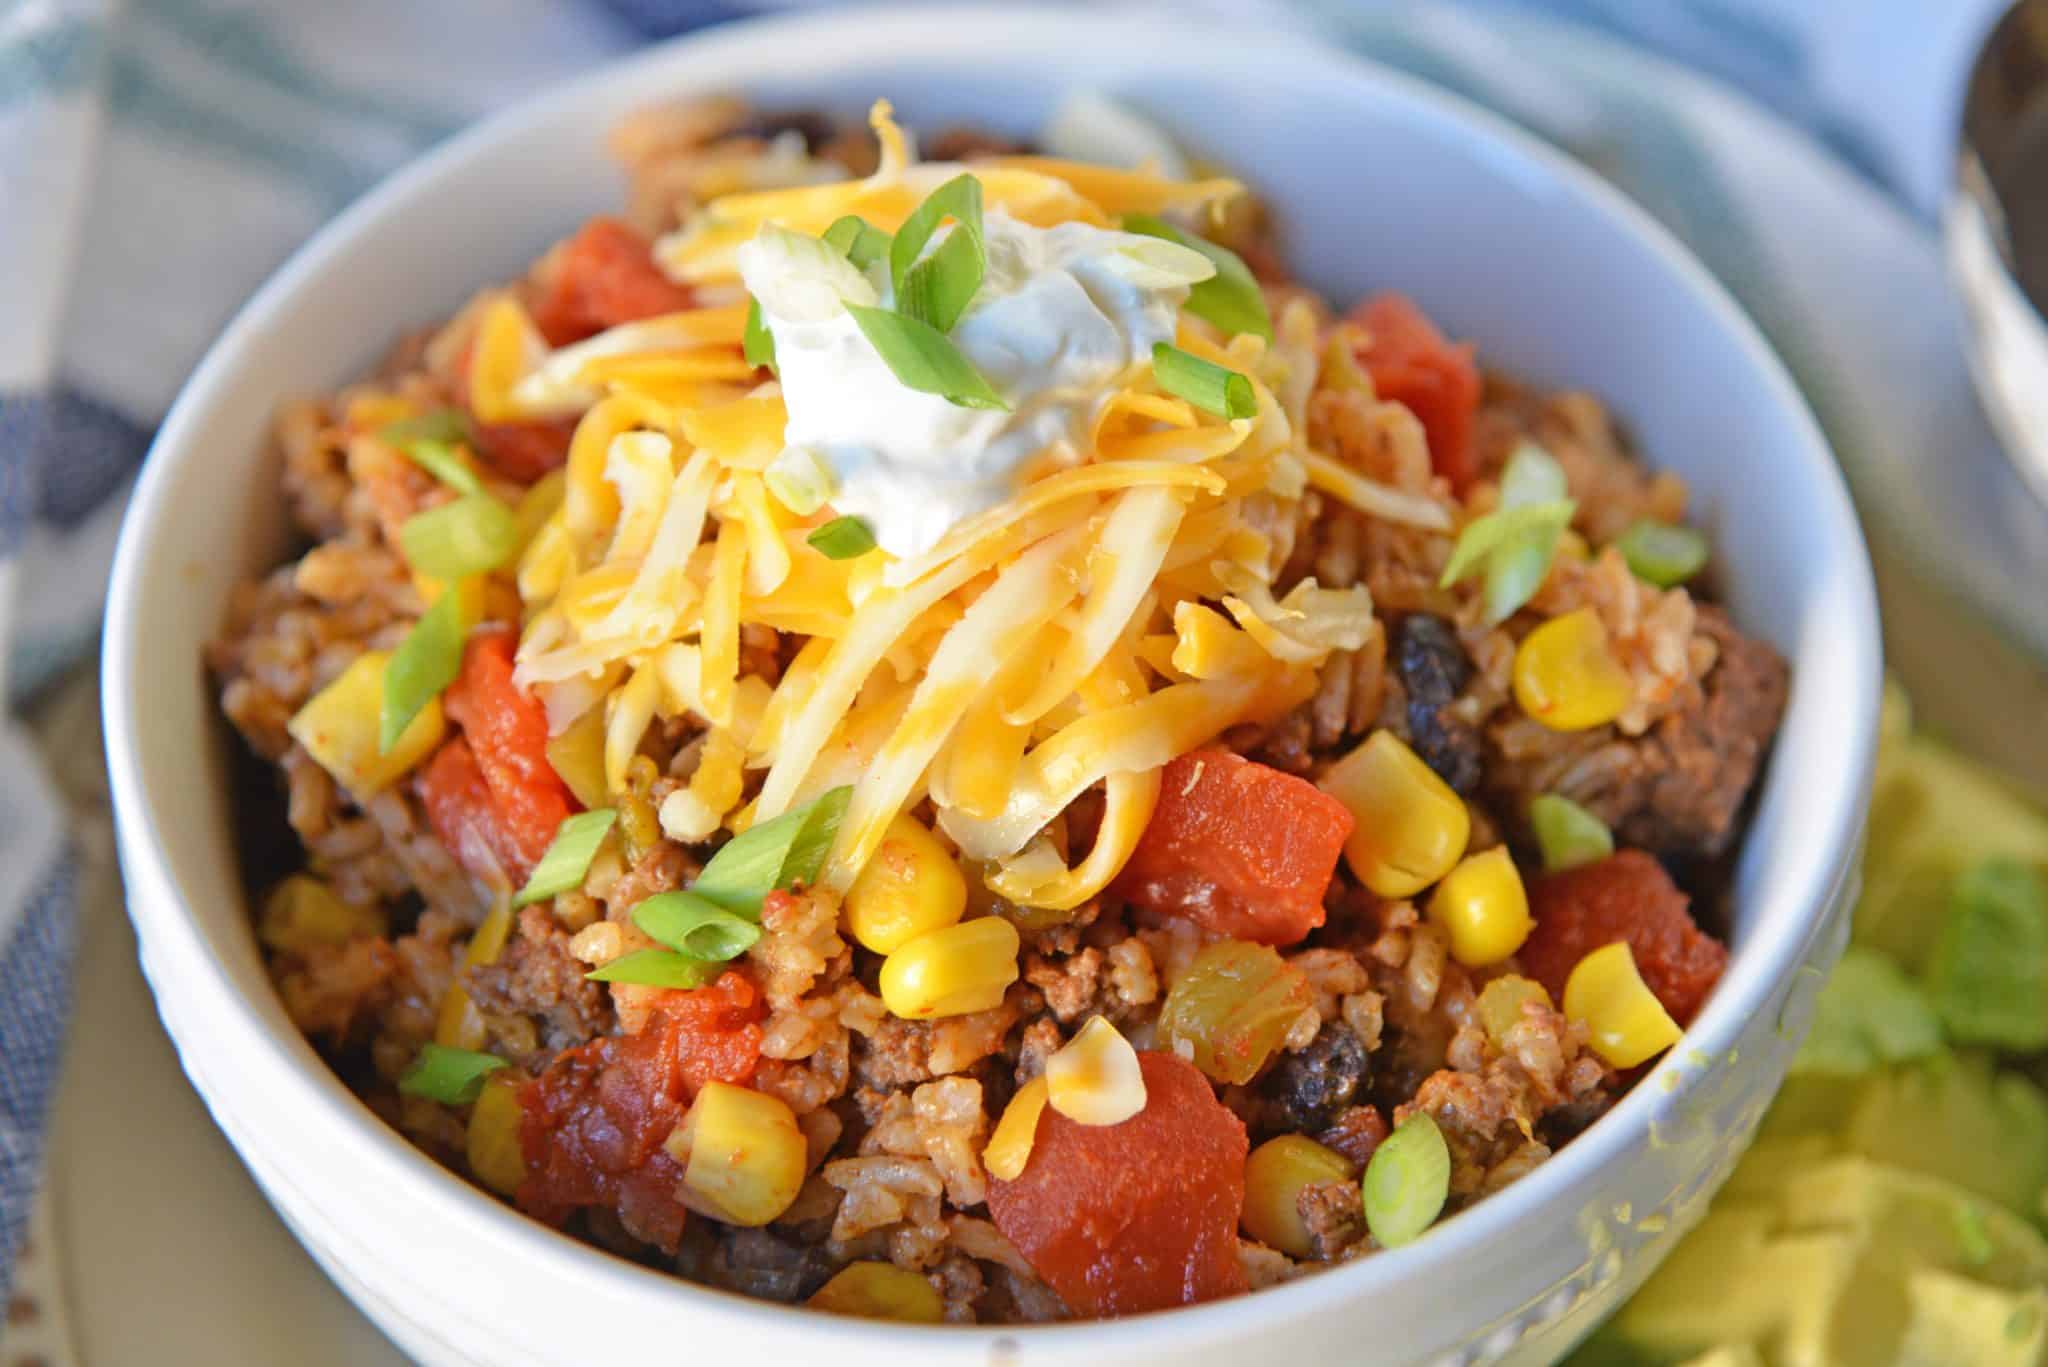 Mexican Beef and Rice Casserole is an easy weeknight recipe using ground beef, taco seasoning and other easy ingredients for a one dish meal! #onedishrecipes #groundbeefrcipes www.savoryexperiments.com